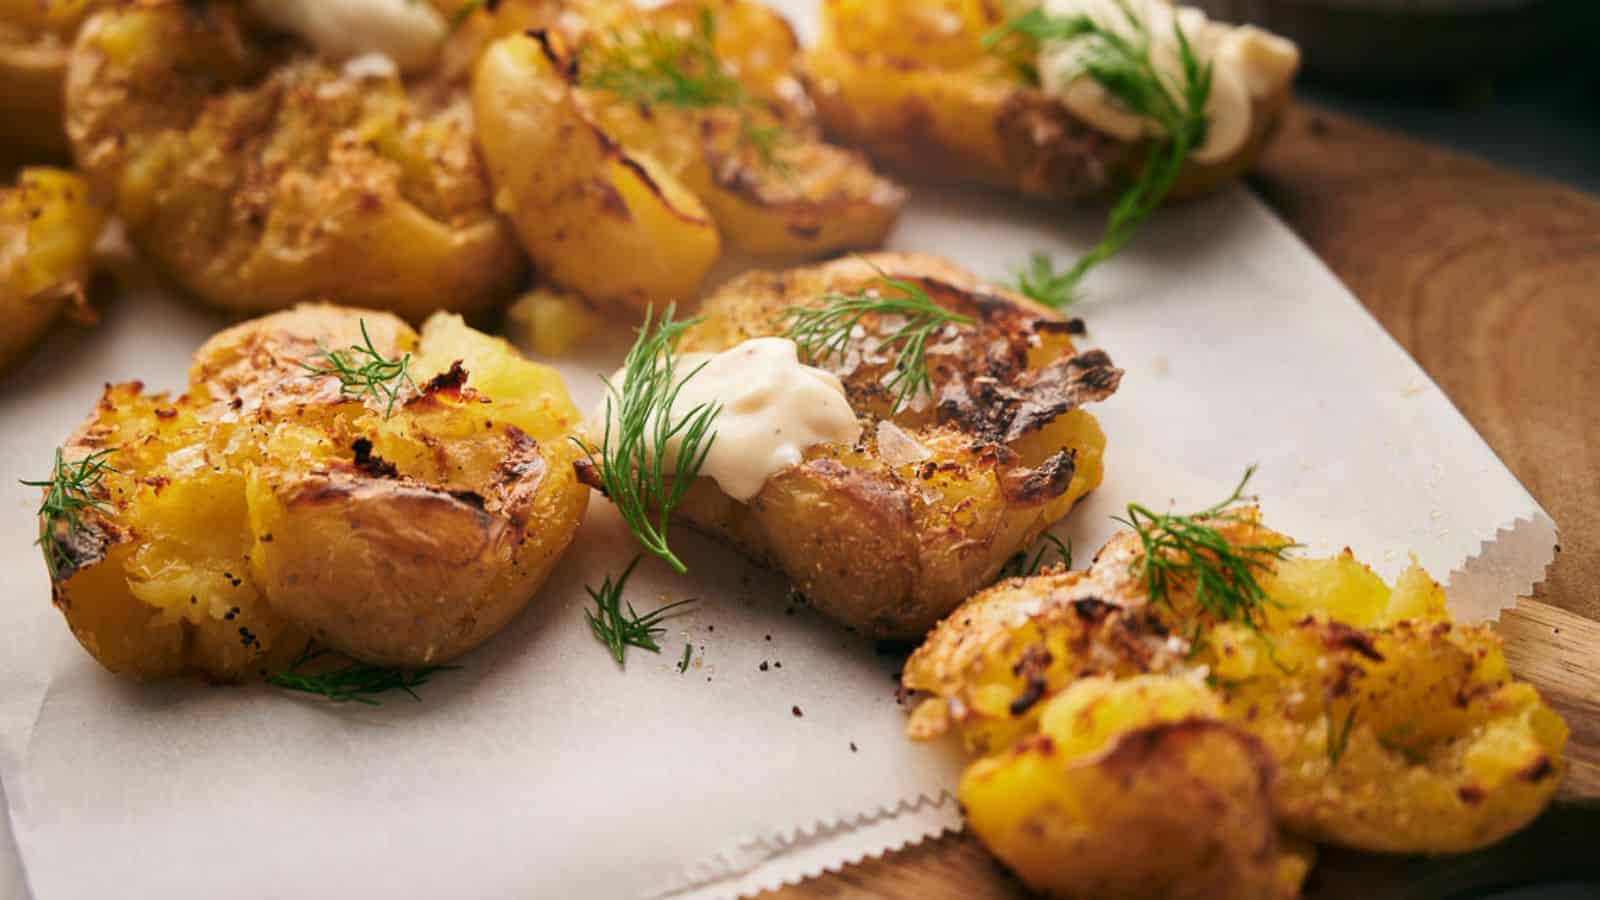 Smashed potatoes on parchment paper, with dollops of sauce and sprigs of dill.